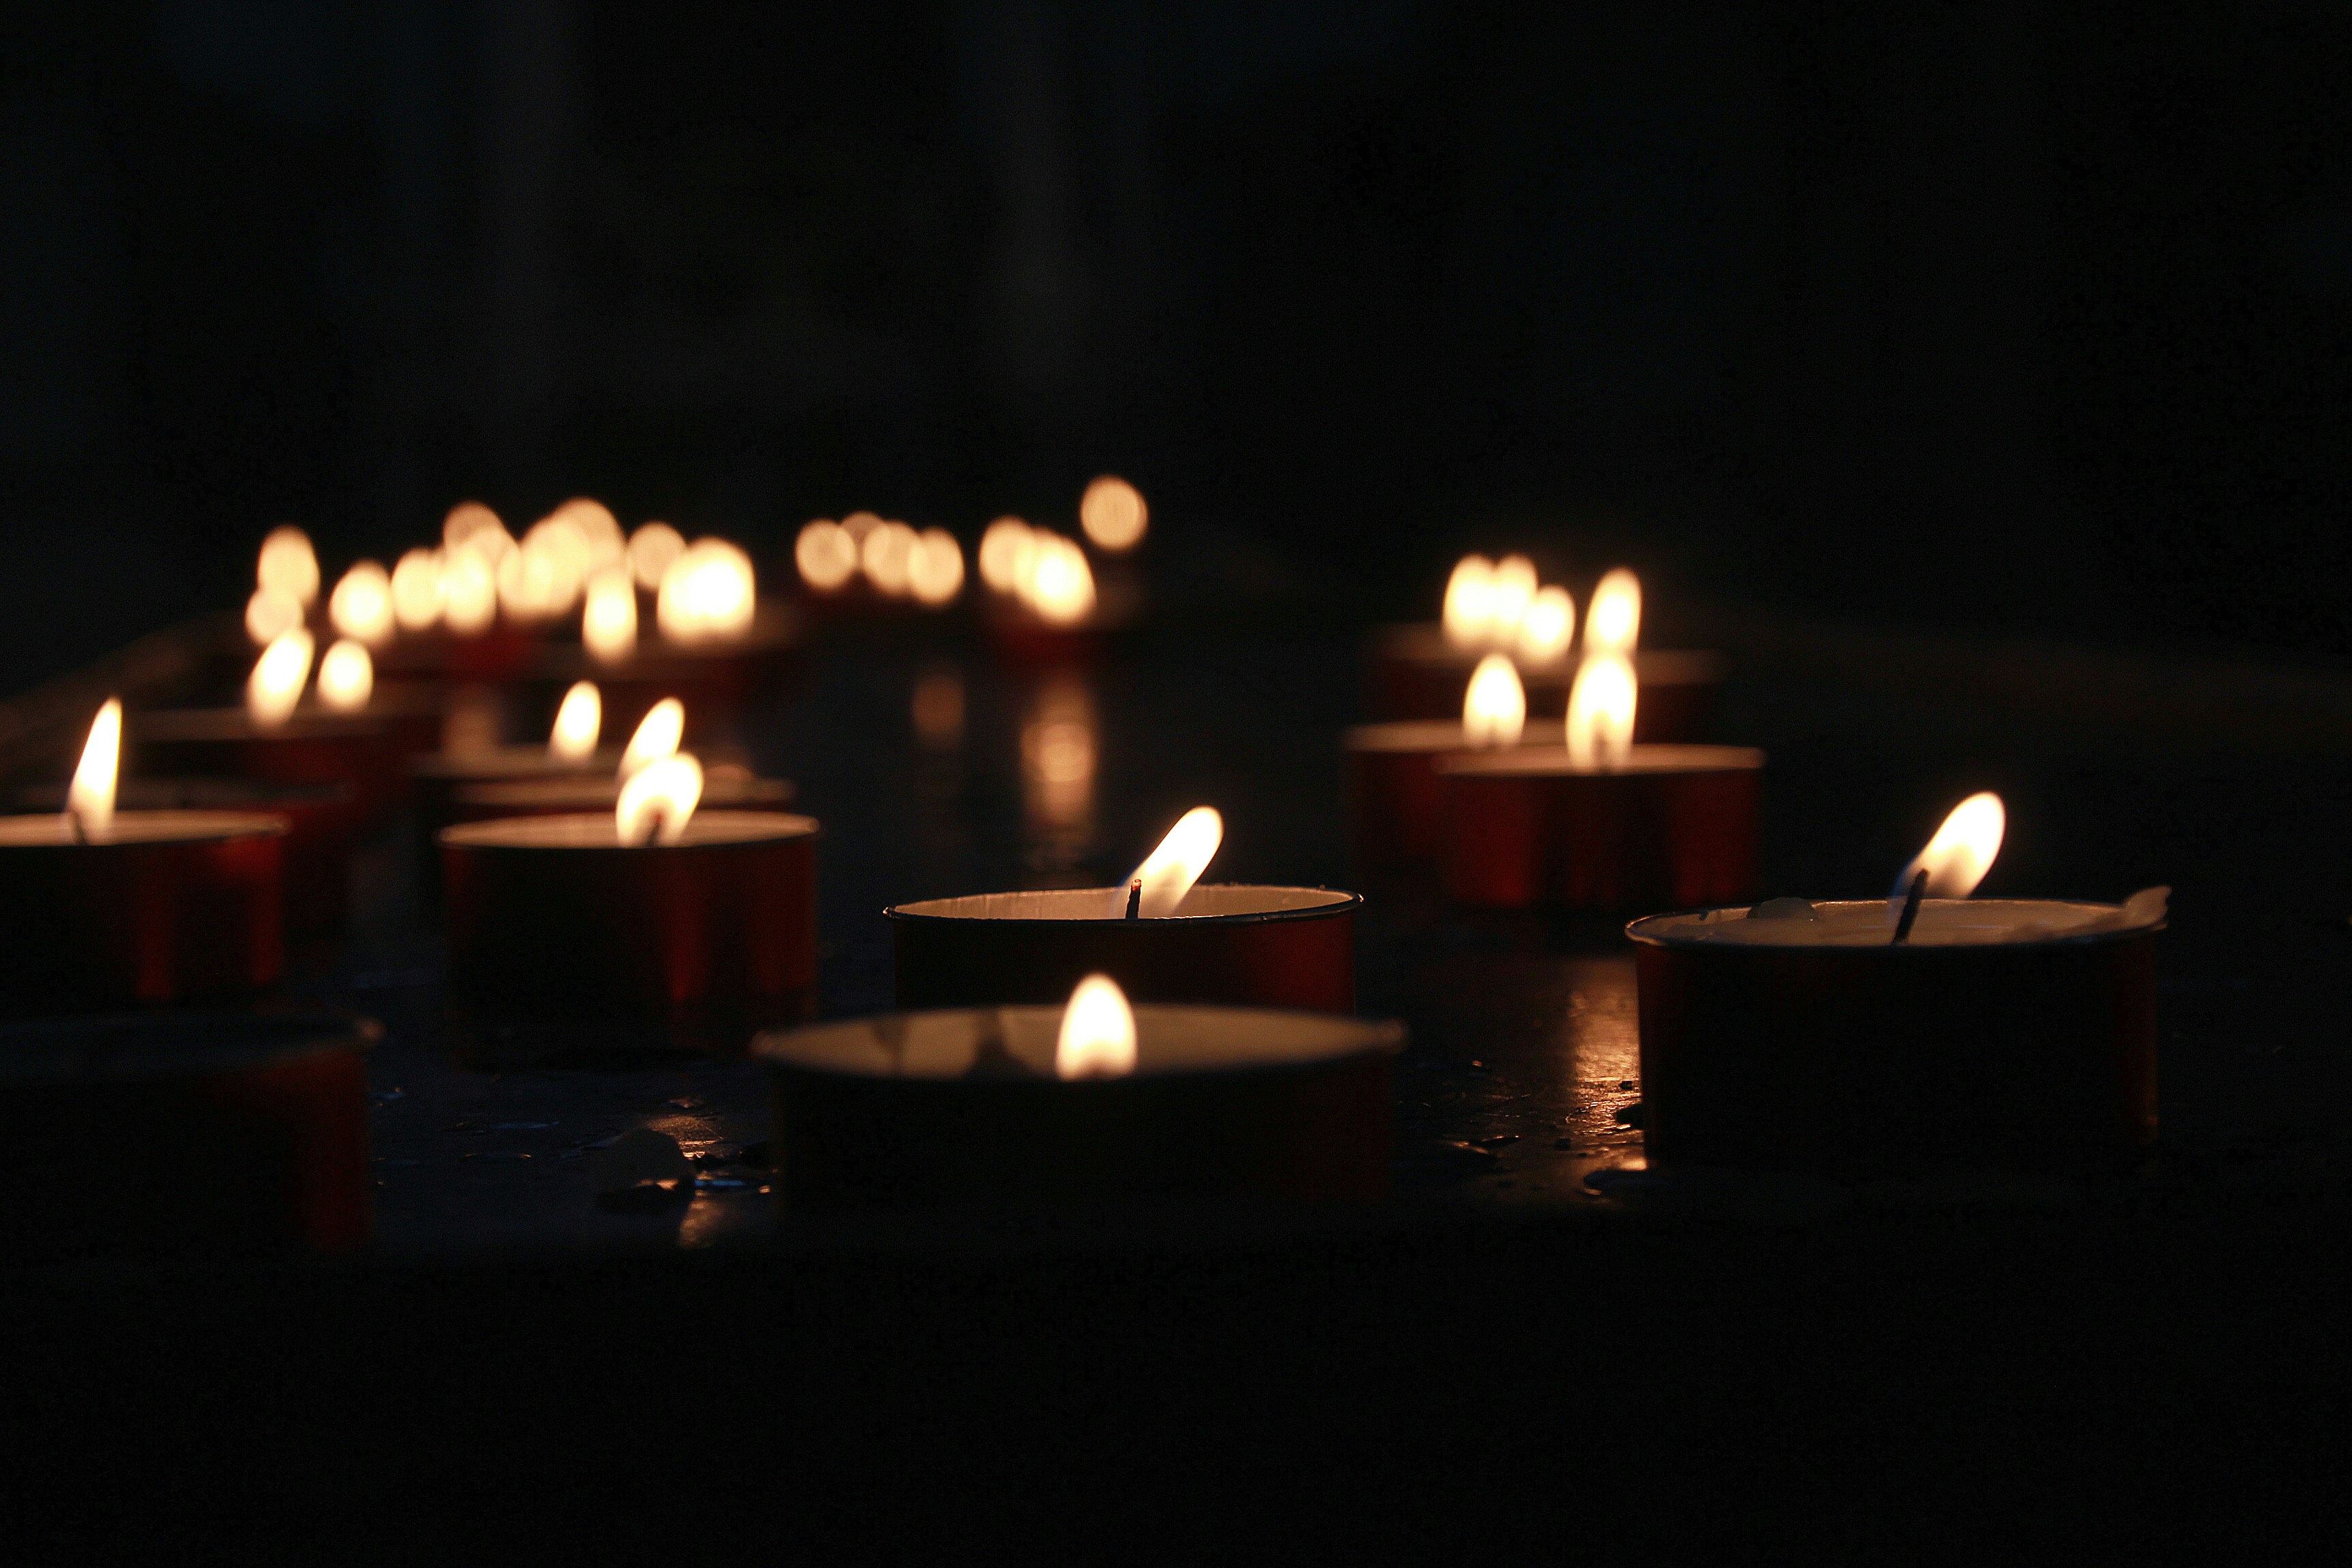 A group of memorial candles are lit in a dark room